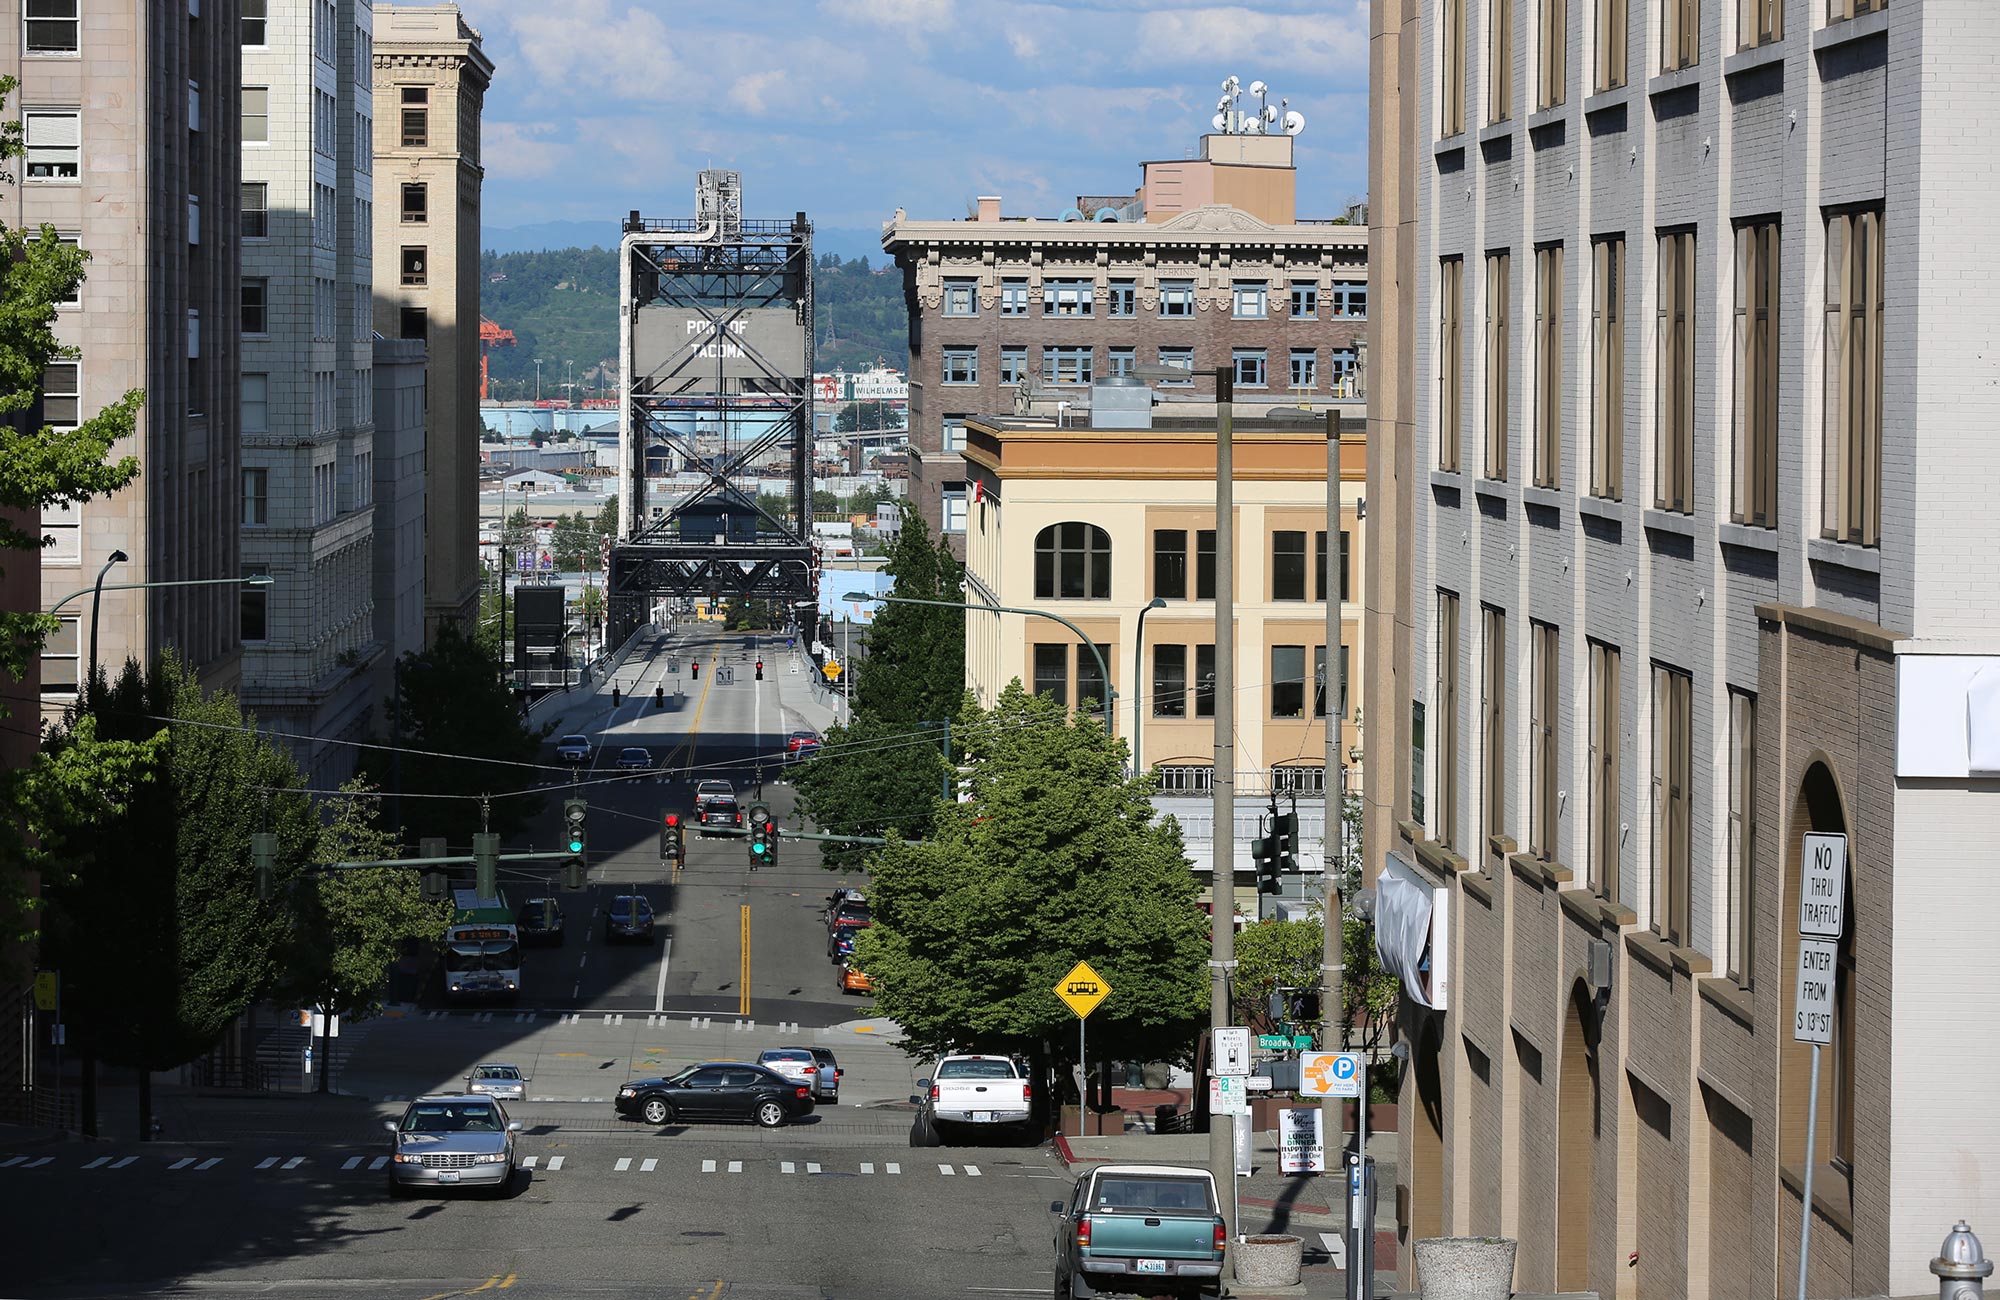 View of the East 11th Street Bridge from downtown Tacoma.